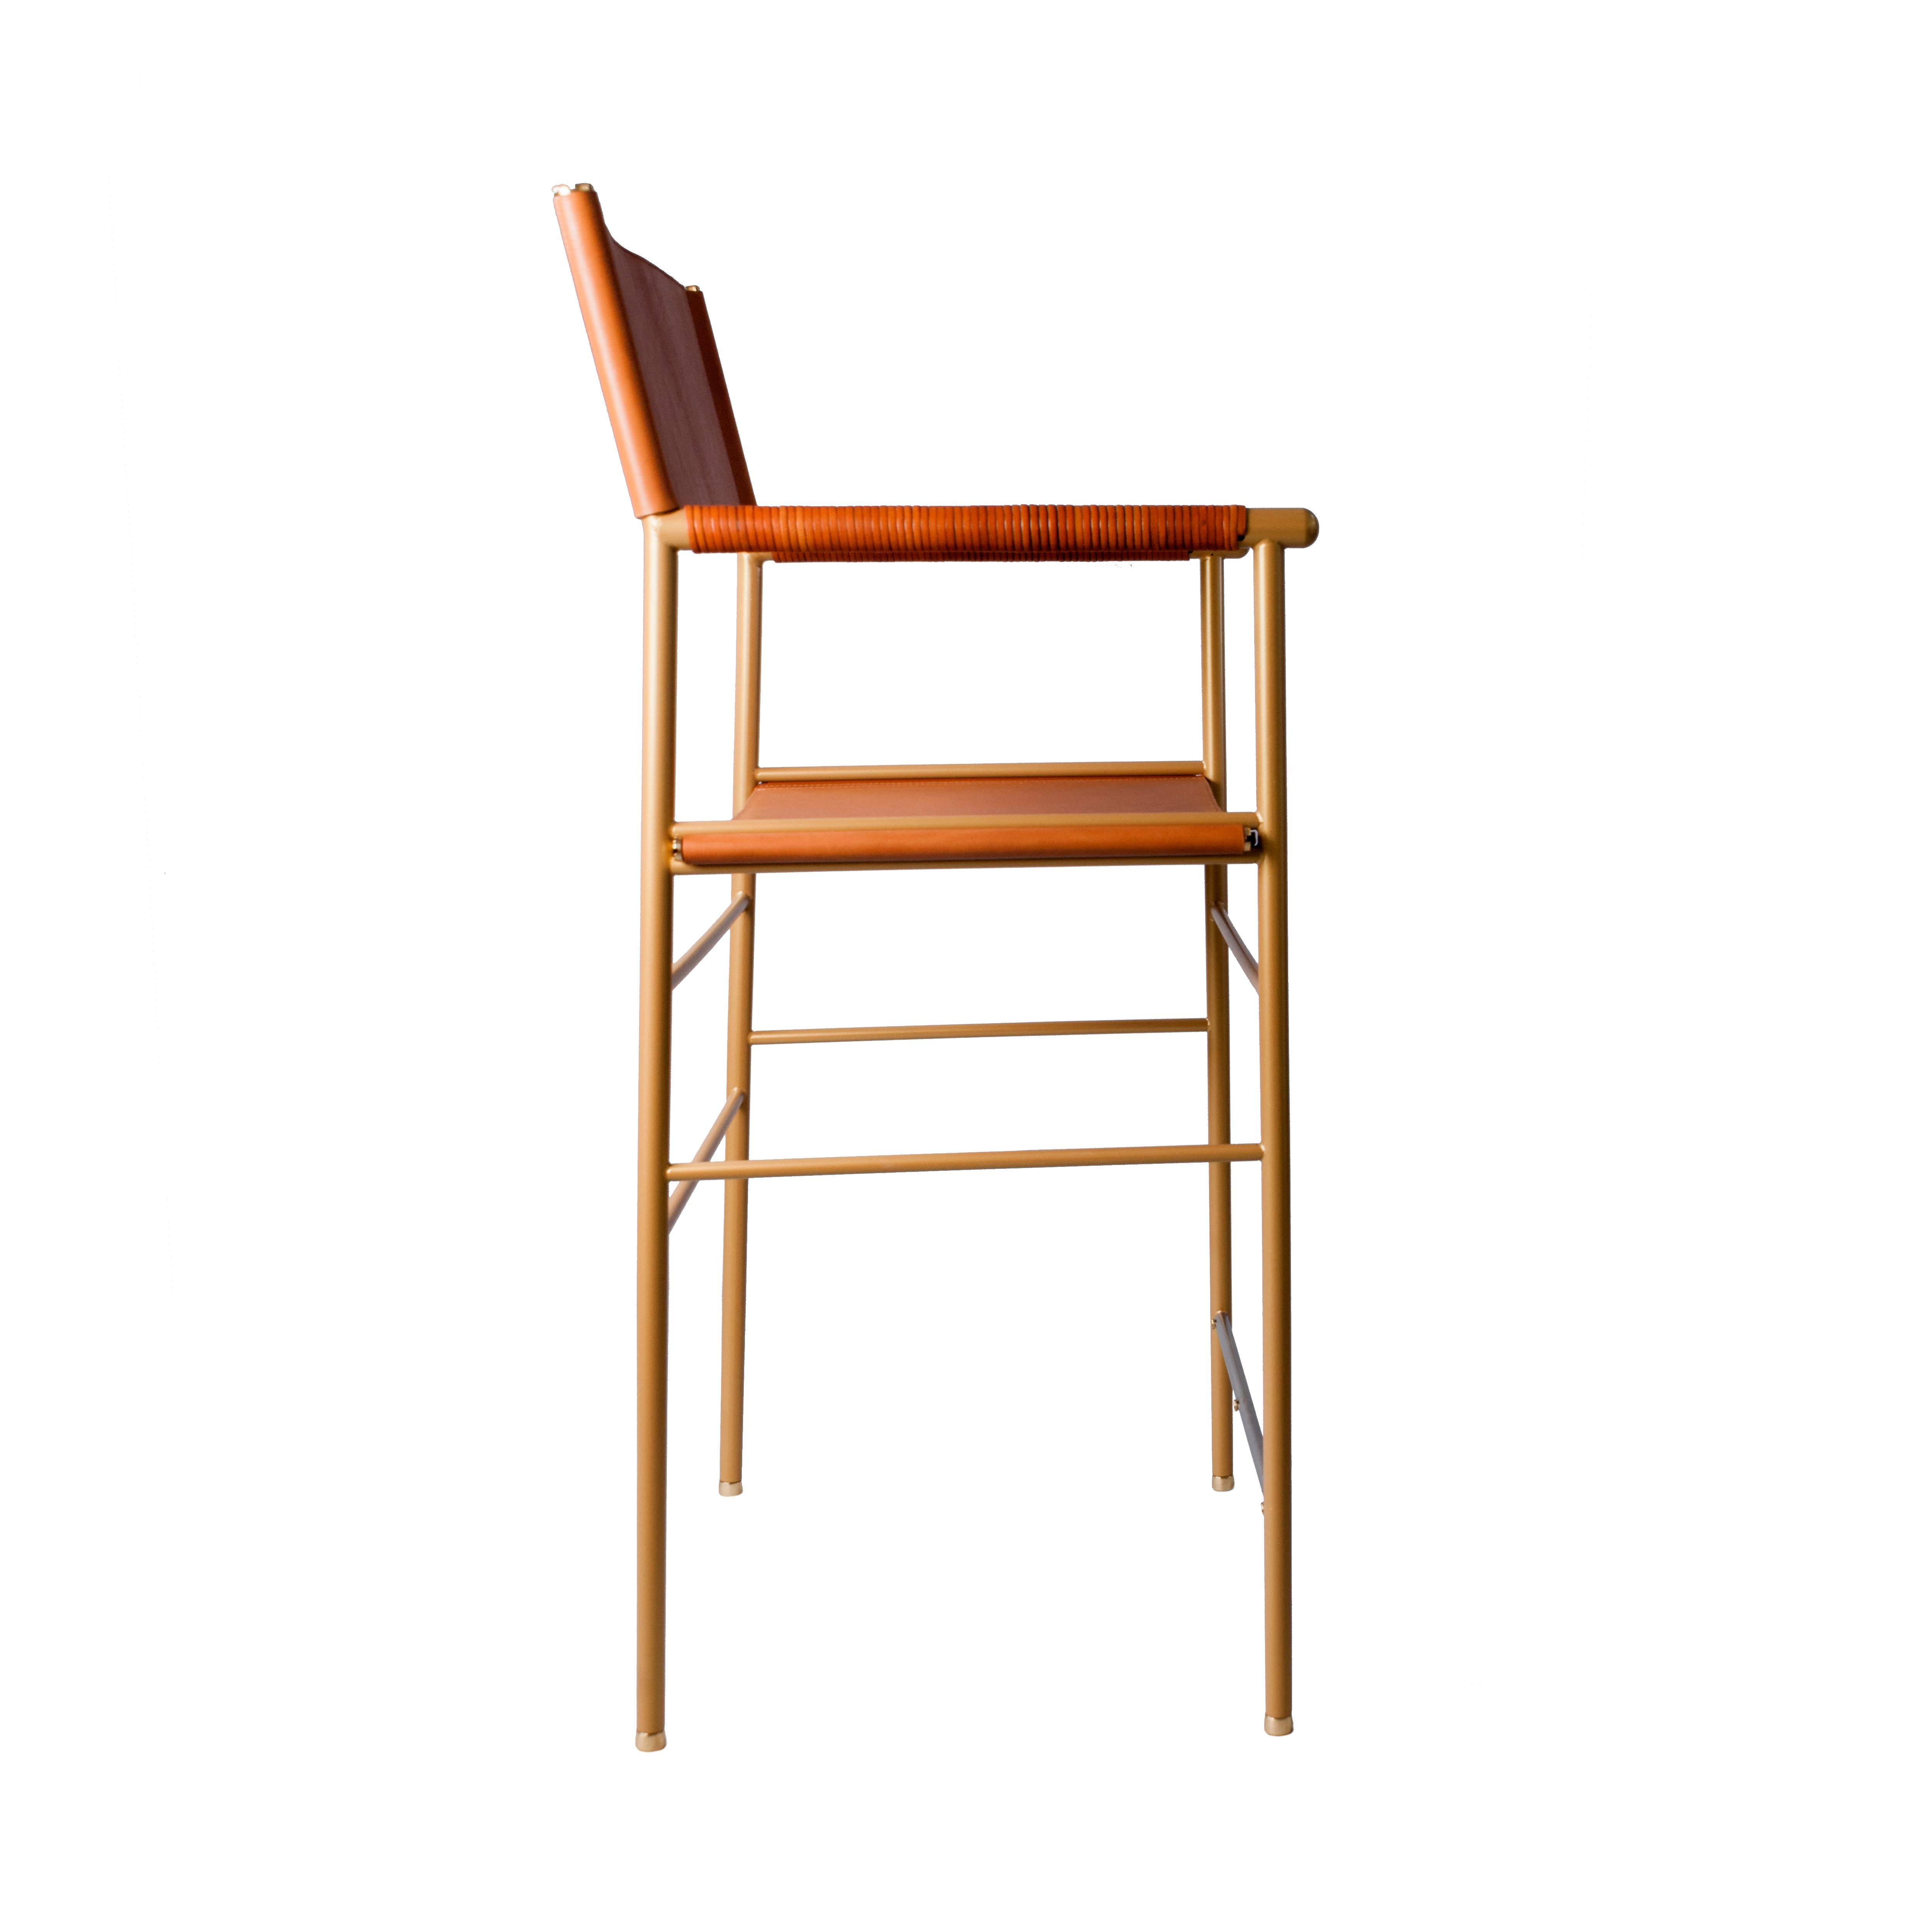 Modern Set of 6 Counter Bar Stools w. Backrest - Tan Leather & Aged Brass Powder Coated For Sale